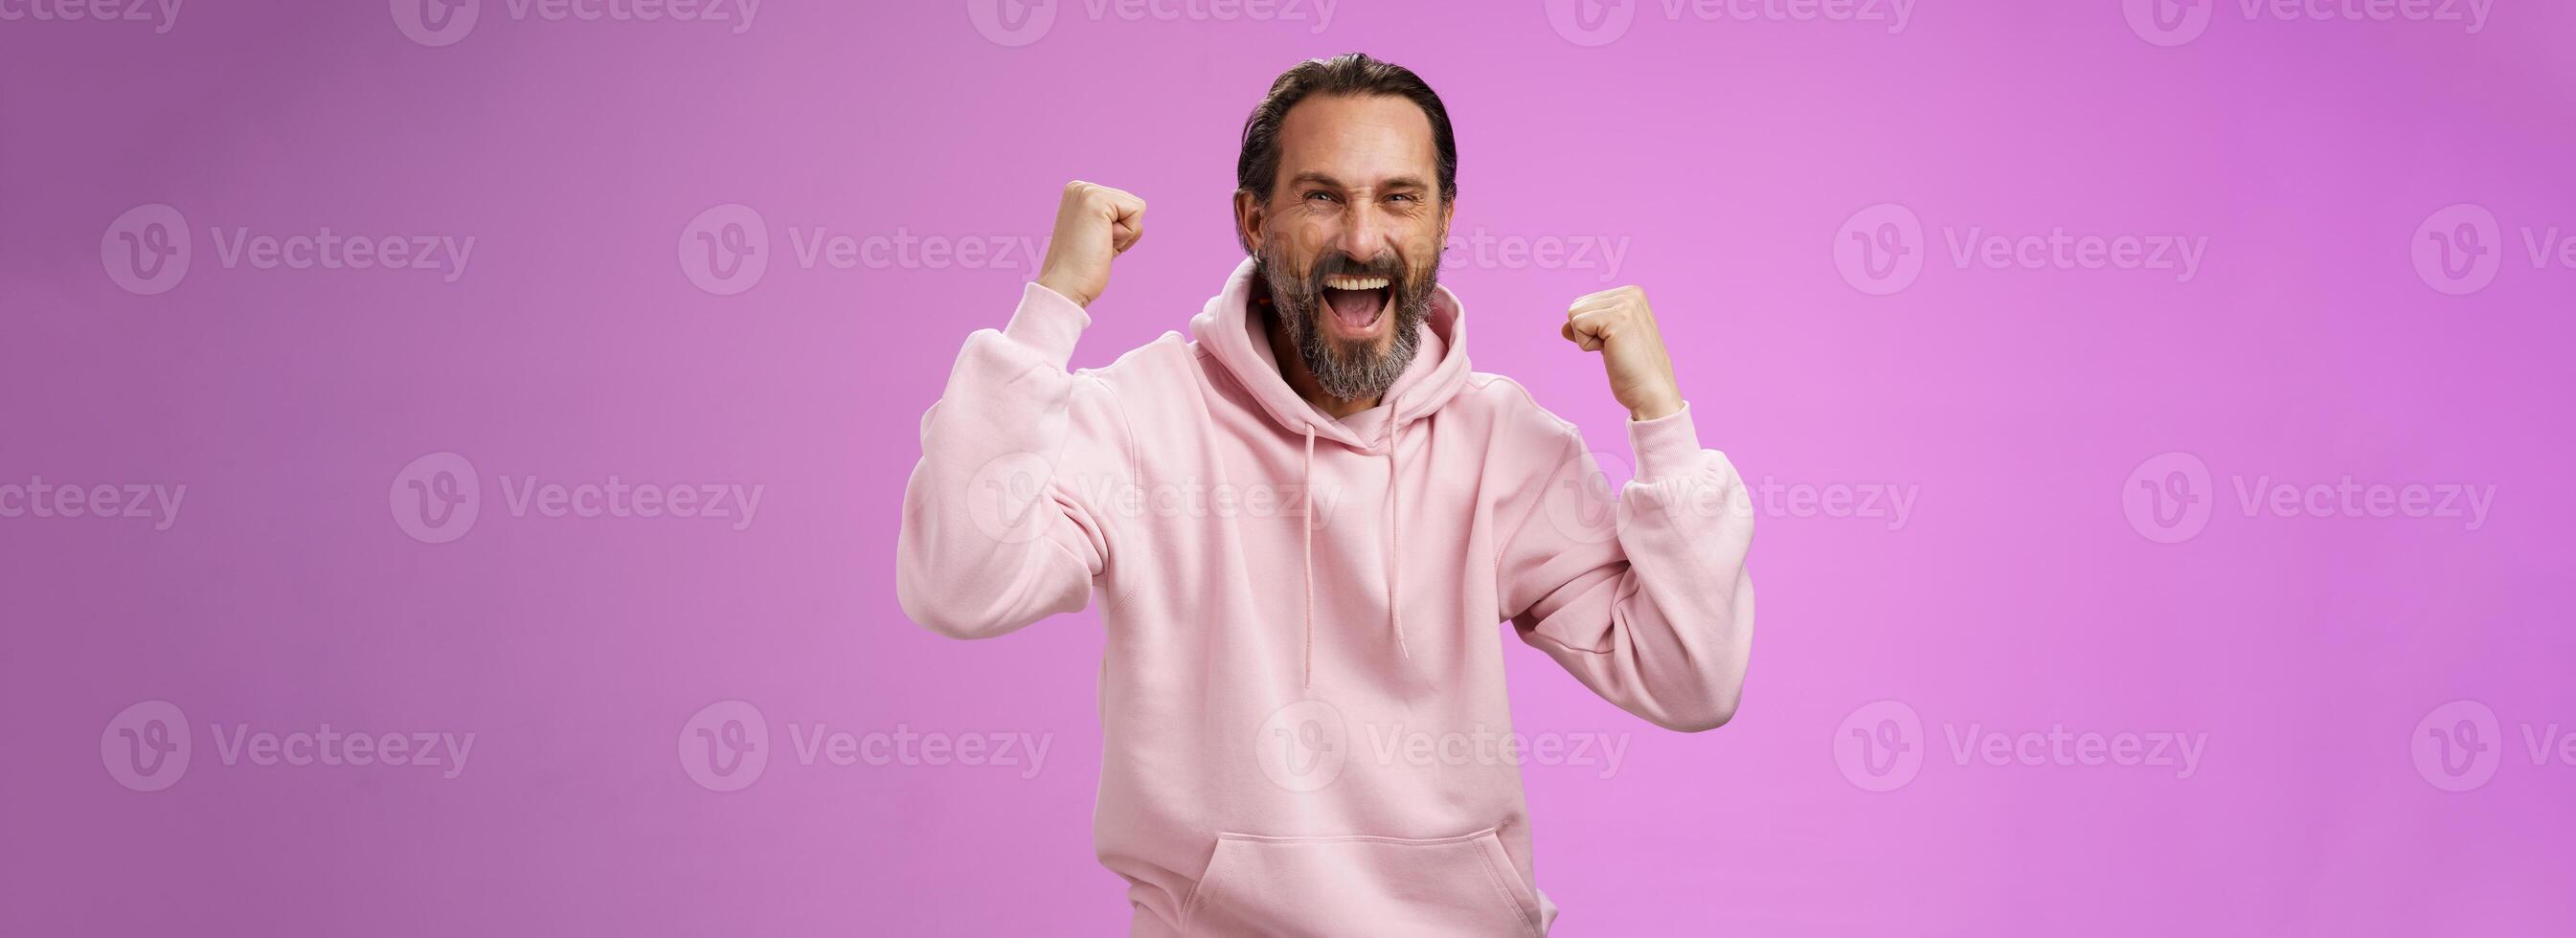 Cheerful supportive manly mature adult bearded guy fan yelling raising clenched fists triumphing team scored goal celebrating standing pleased shouting achieving success, posing purple background photo